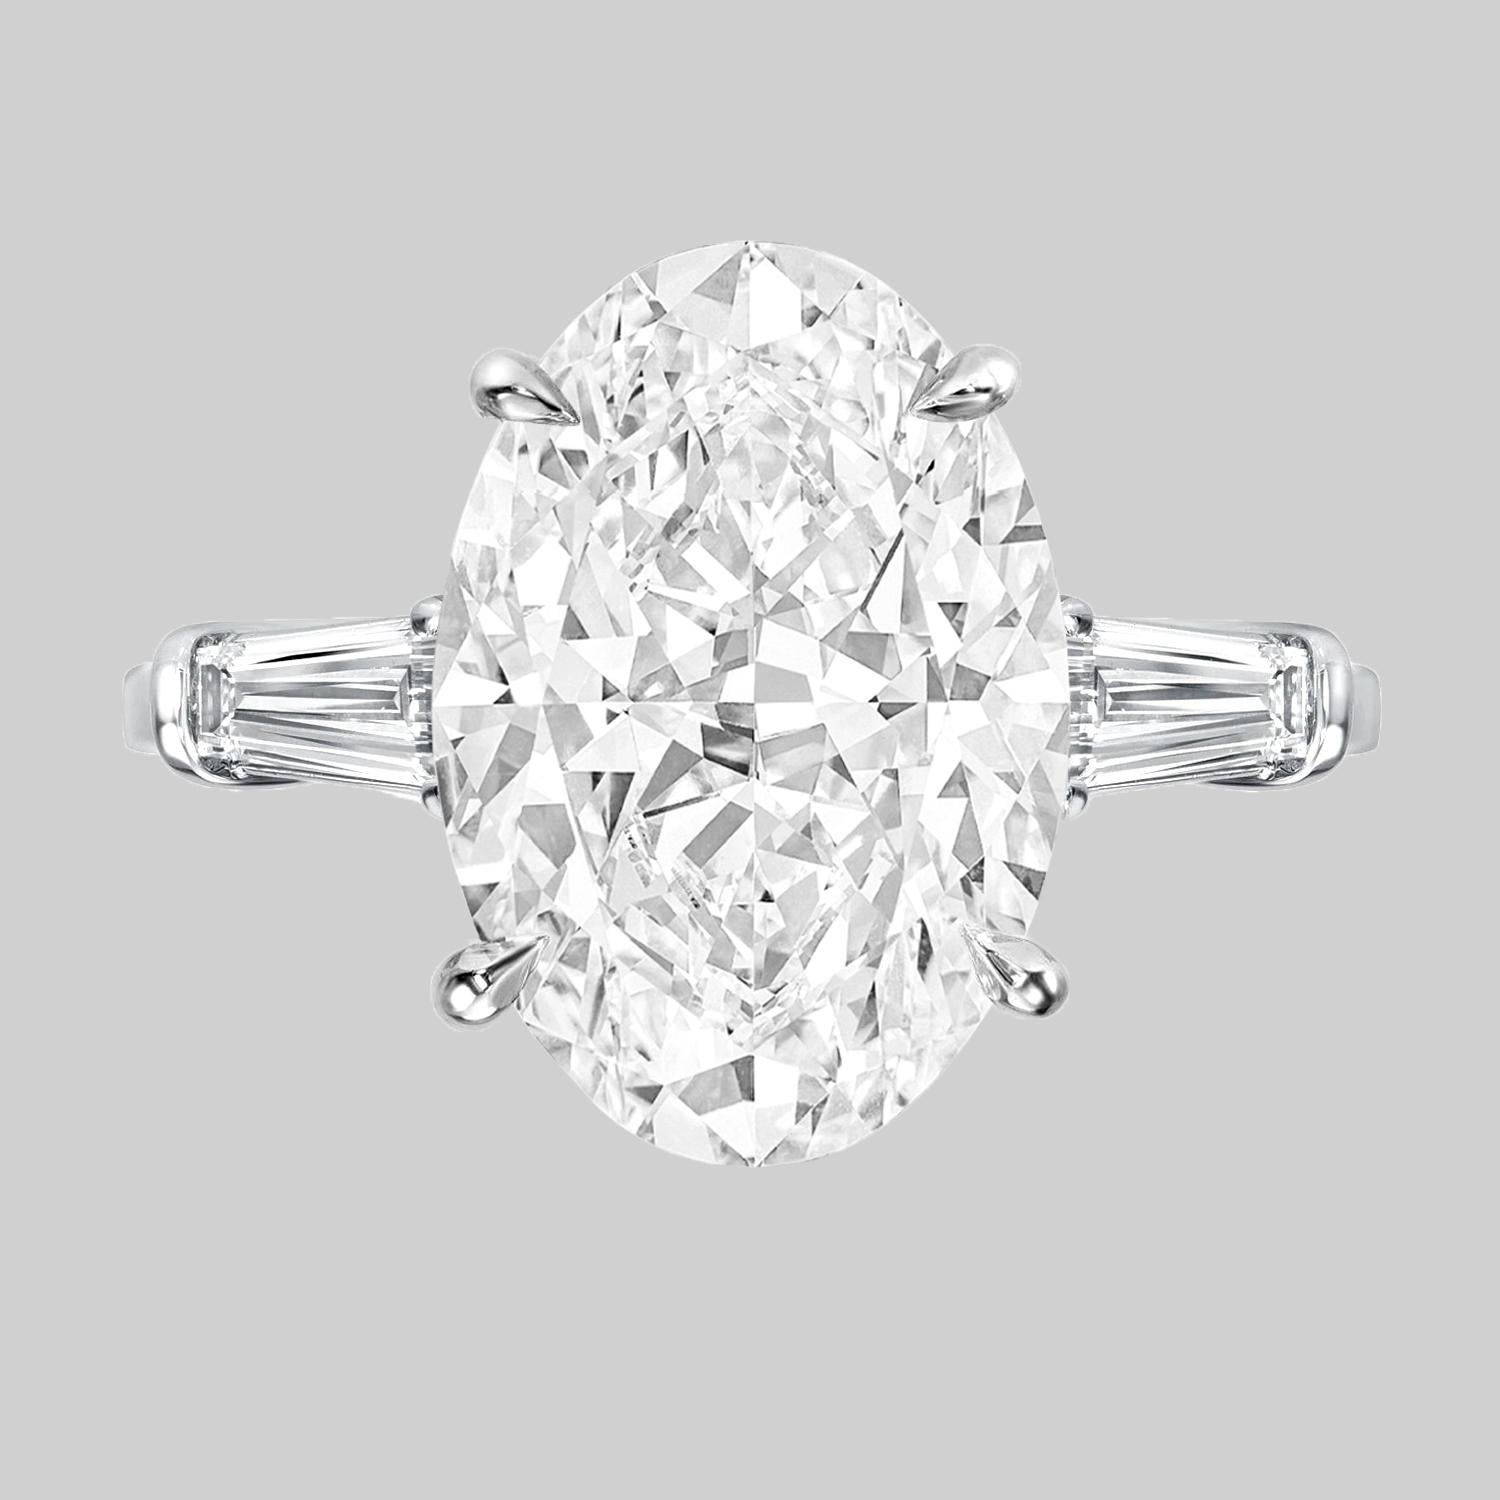 An exquisite GIA certified 4.04 carat oval diamond ring the diamond has excellent proportions and ideal shape it has been mounted with two delicate prongs and tapered baguettes set in solid platinum